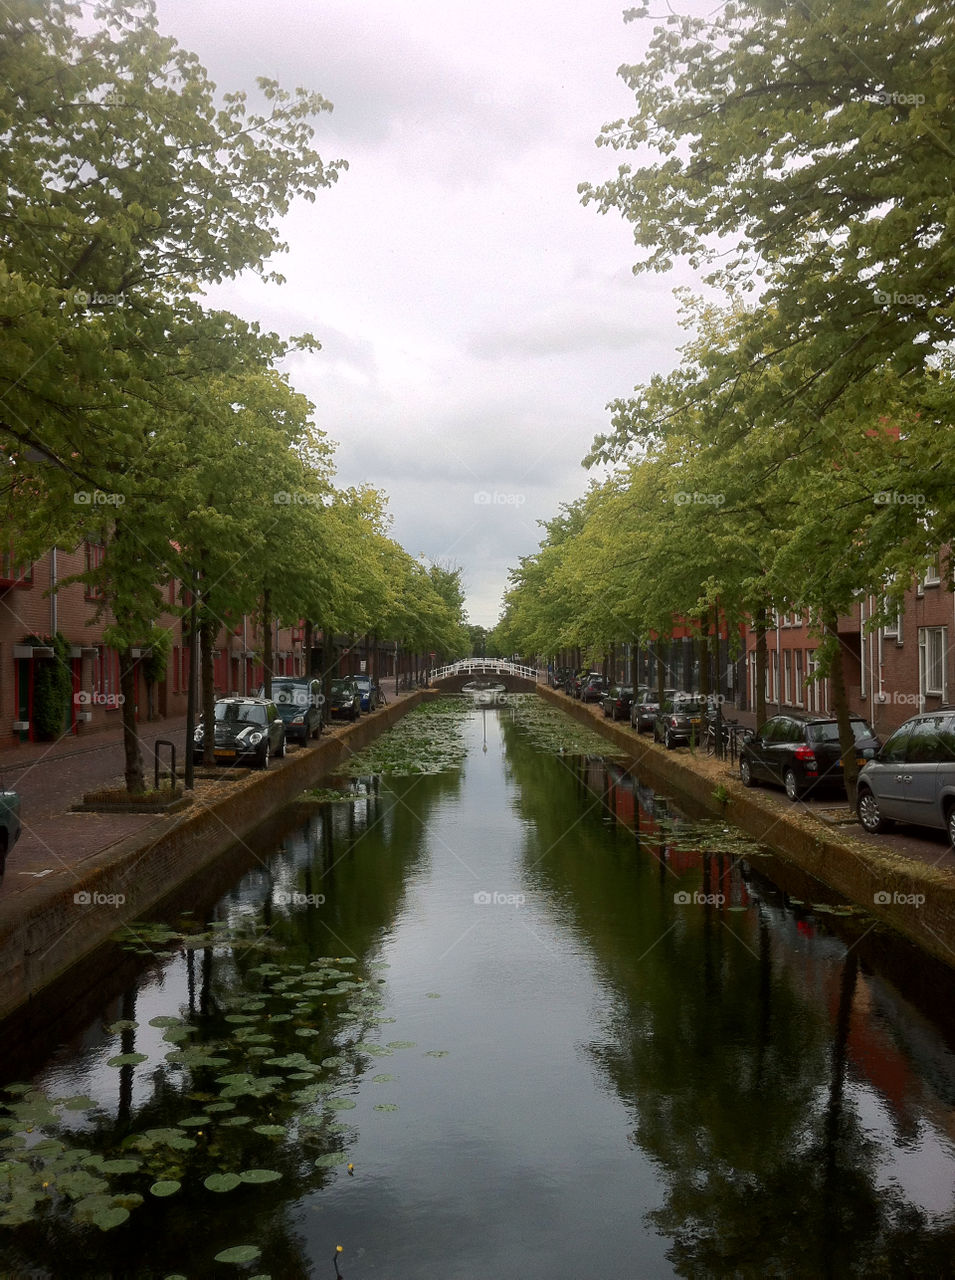 Water, No Person, Canal, Tree, Nature